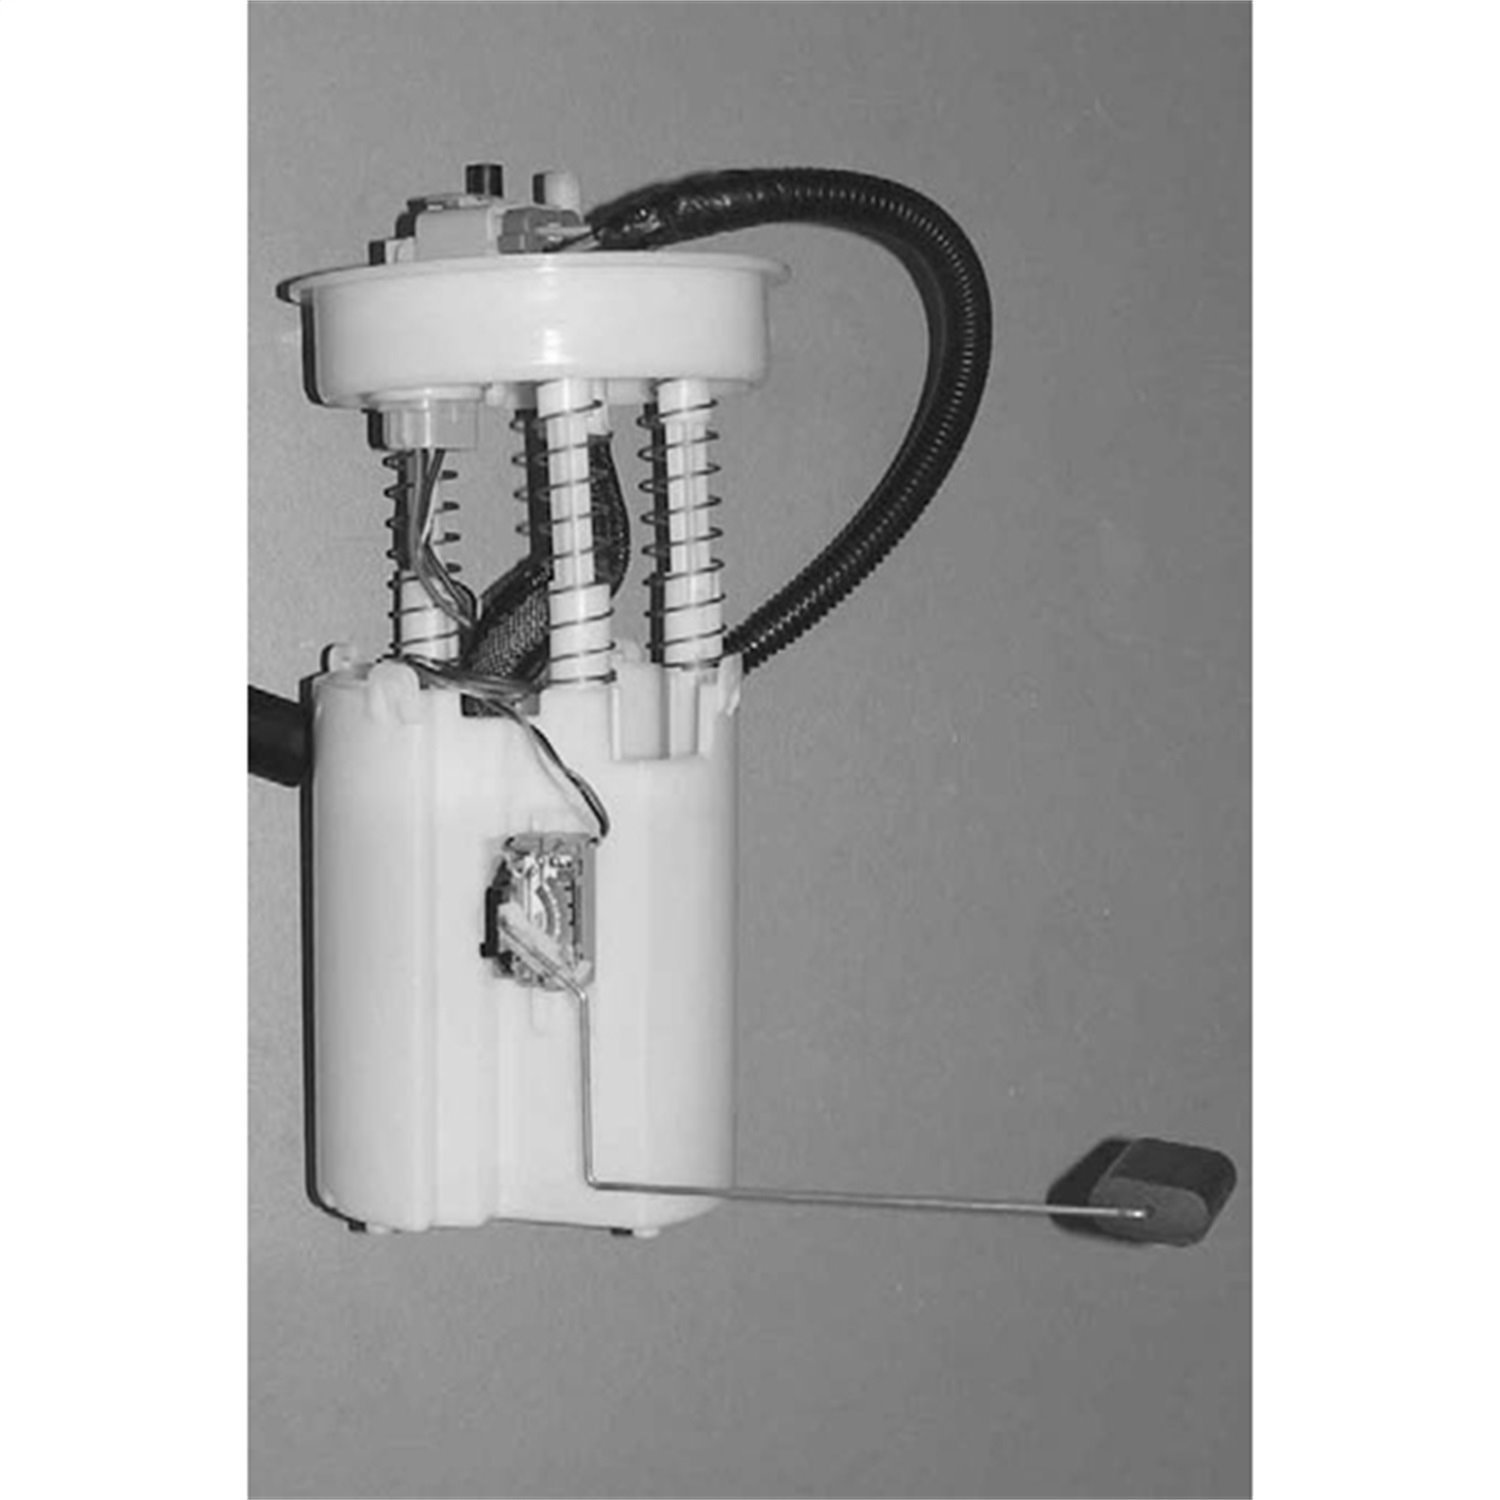 Replacement fuel pump module from Omix-ADA, Fits 93-94 Jeep Grand Cherokee ZJ with 4.0L and 5.2L engines.